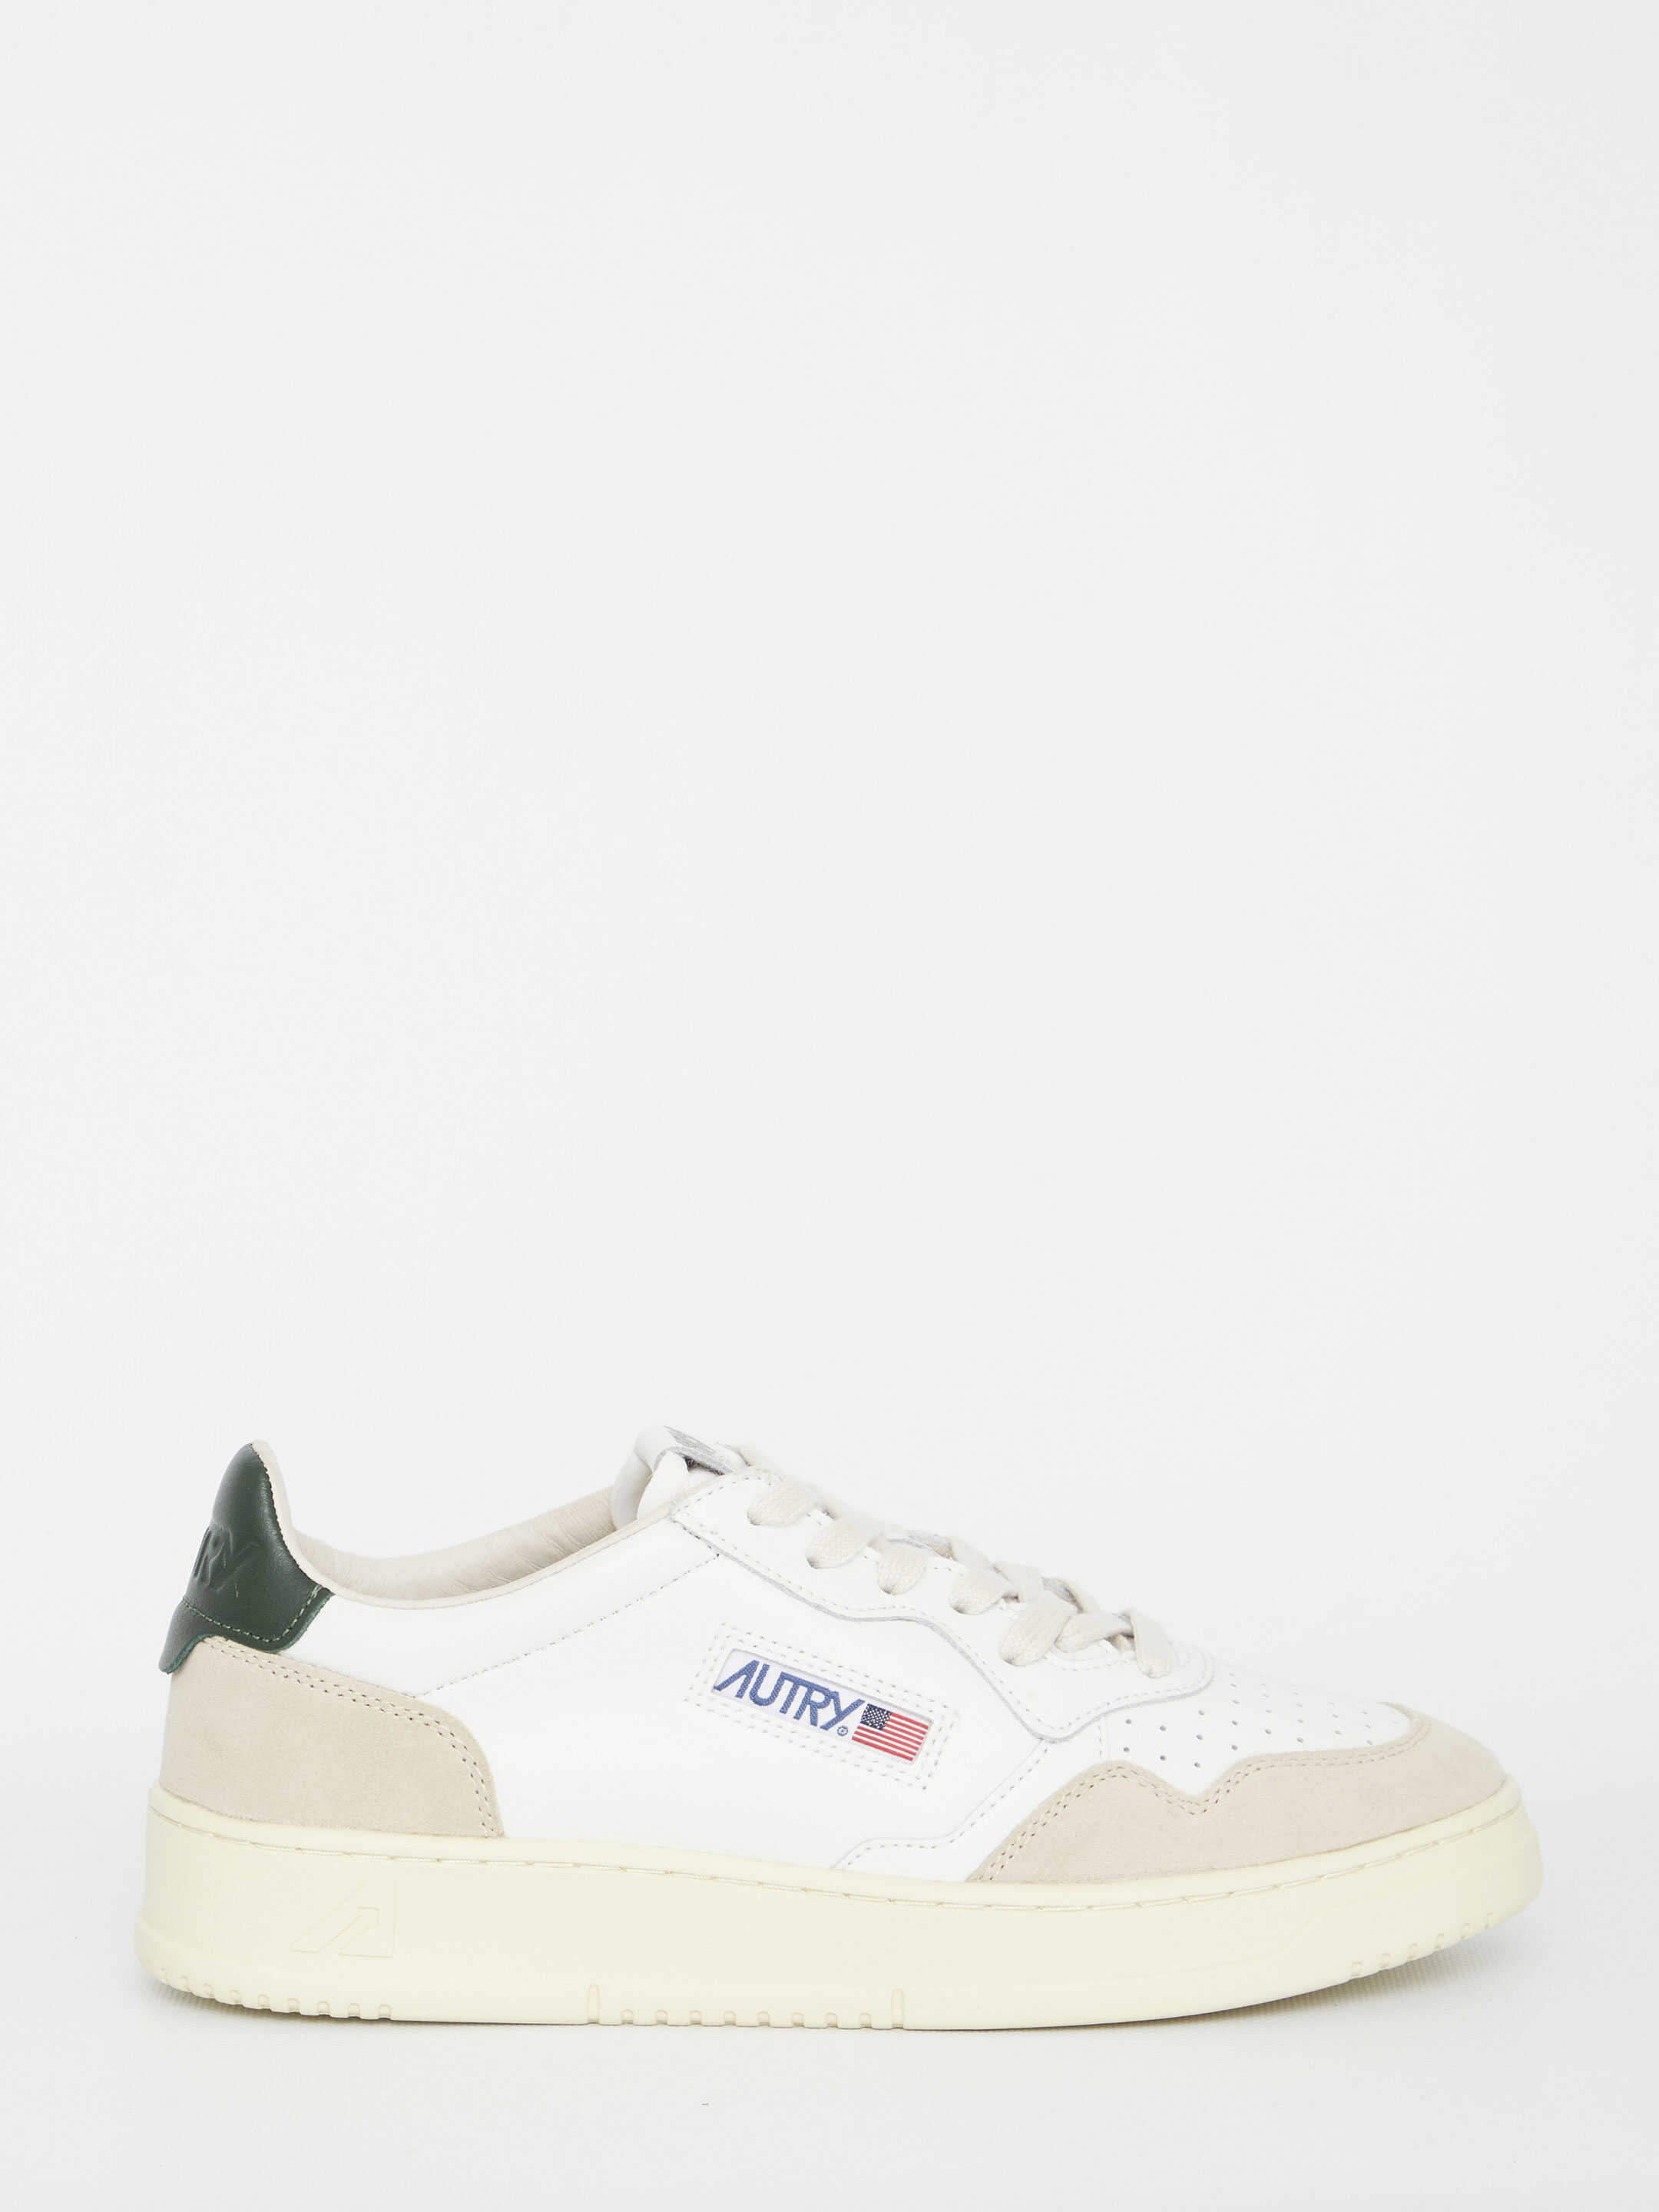 AUTRY Medalist Suede Sneakers WHITE image11